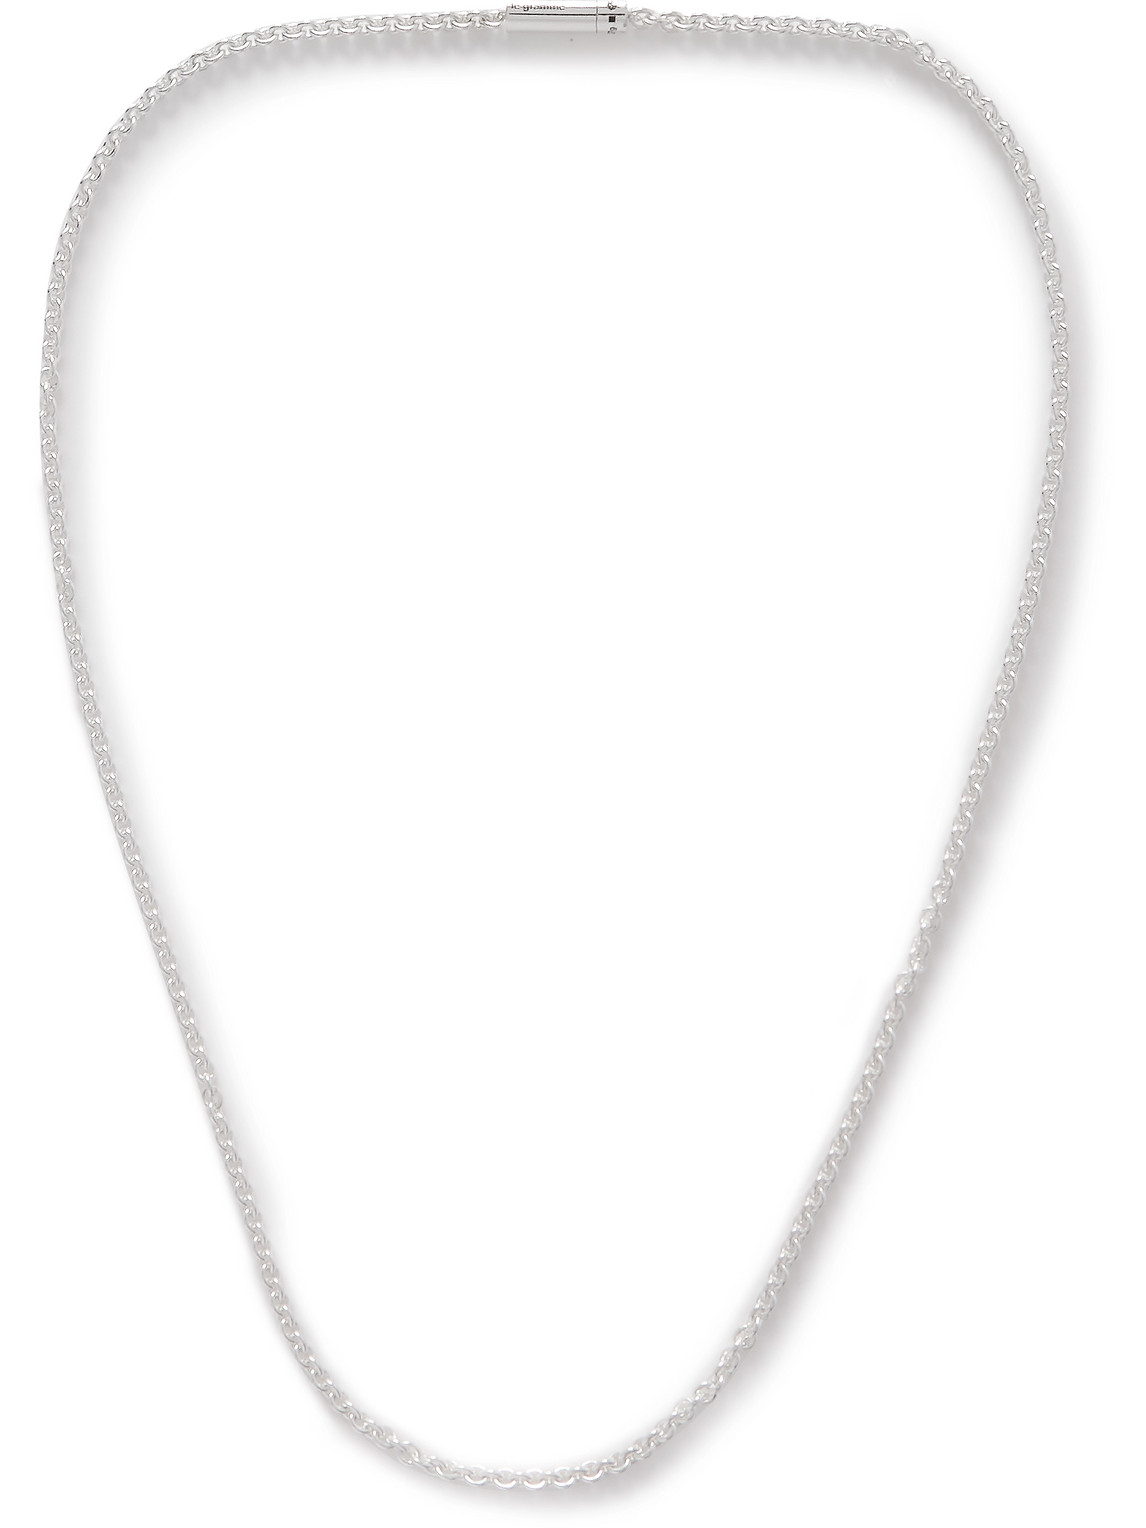 Le Gramme 27g Recycled Sterling Silver Necklace